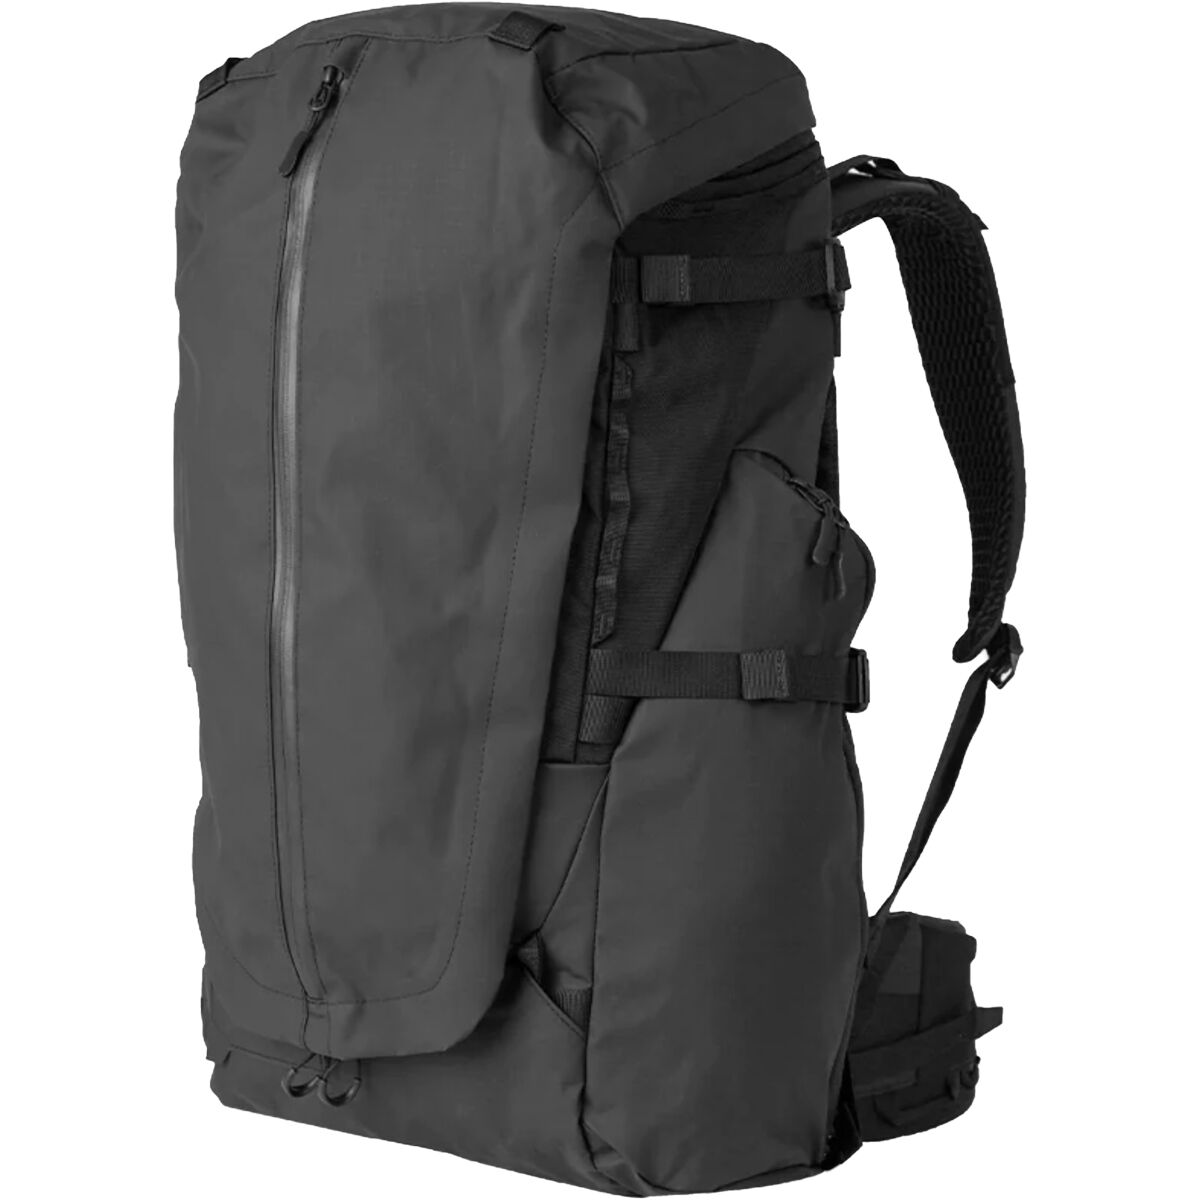 WANDRD Fernweh Backpacking Bag – MUST READ Review